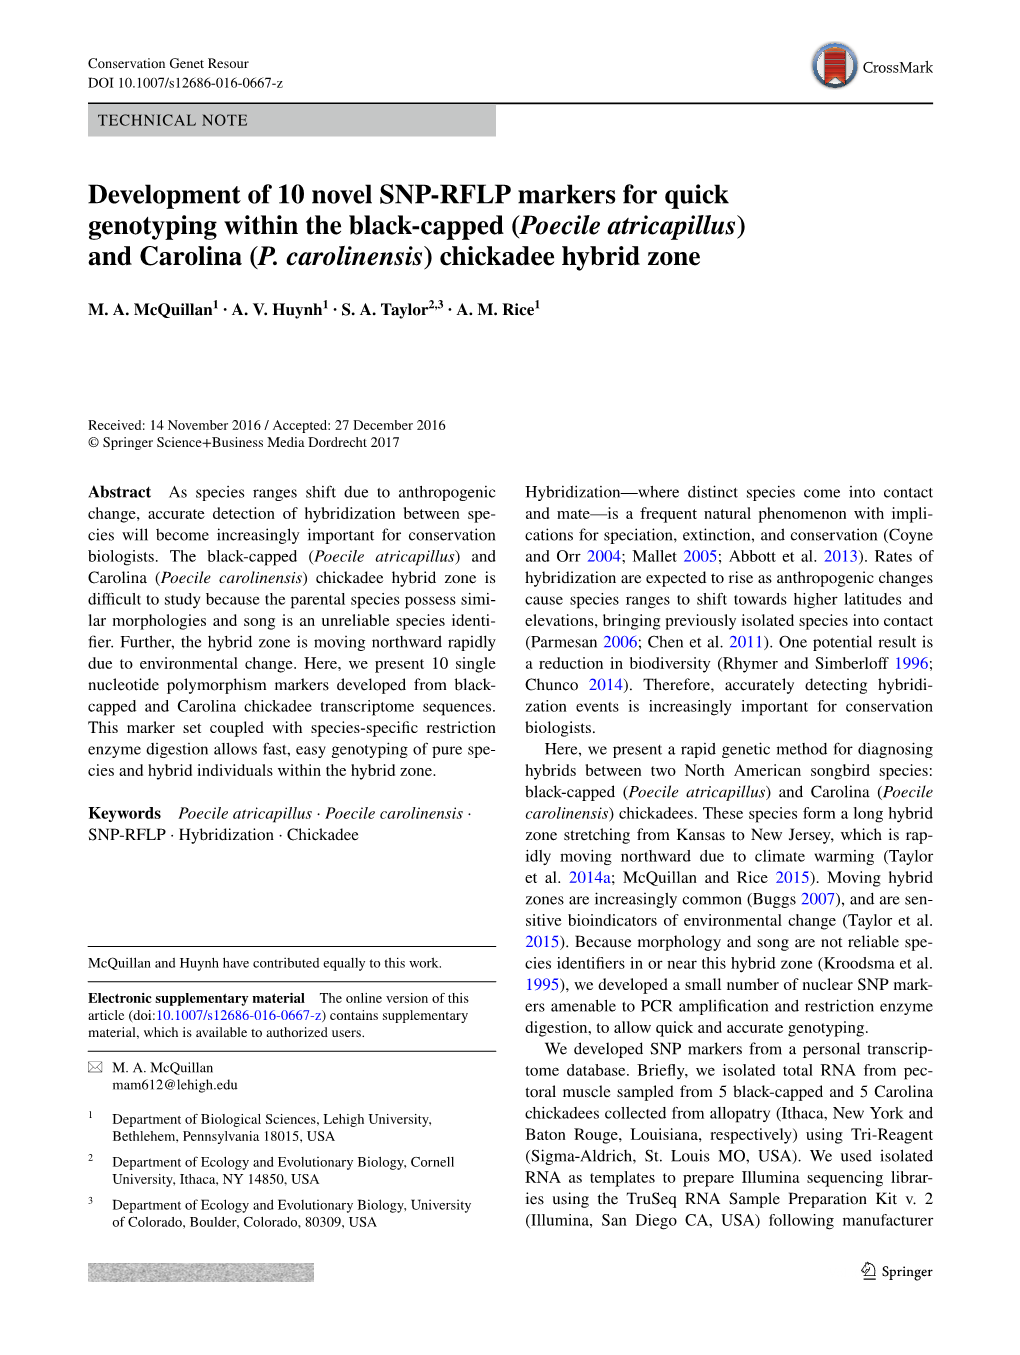 Development of 10 Novel SNP-RFLP Markers for Quick Genotyping Within the Black-Capped (Poecile Atricapillus) and Carolina (P